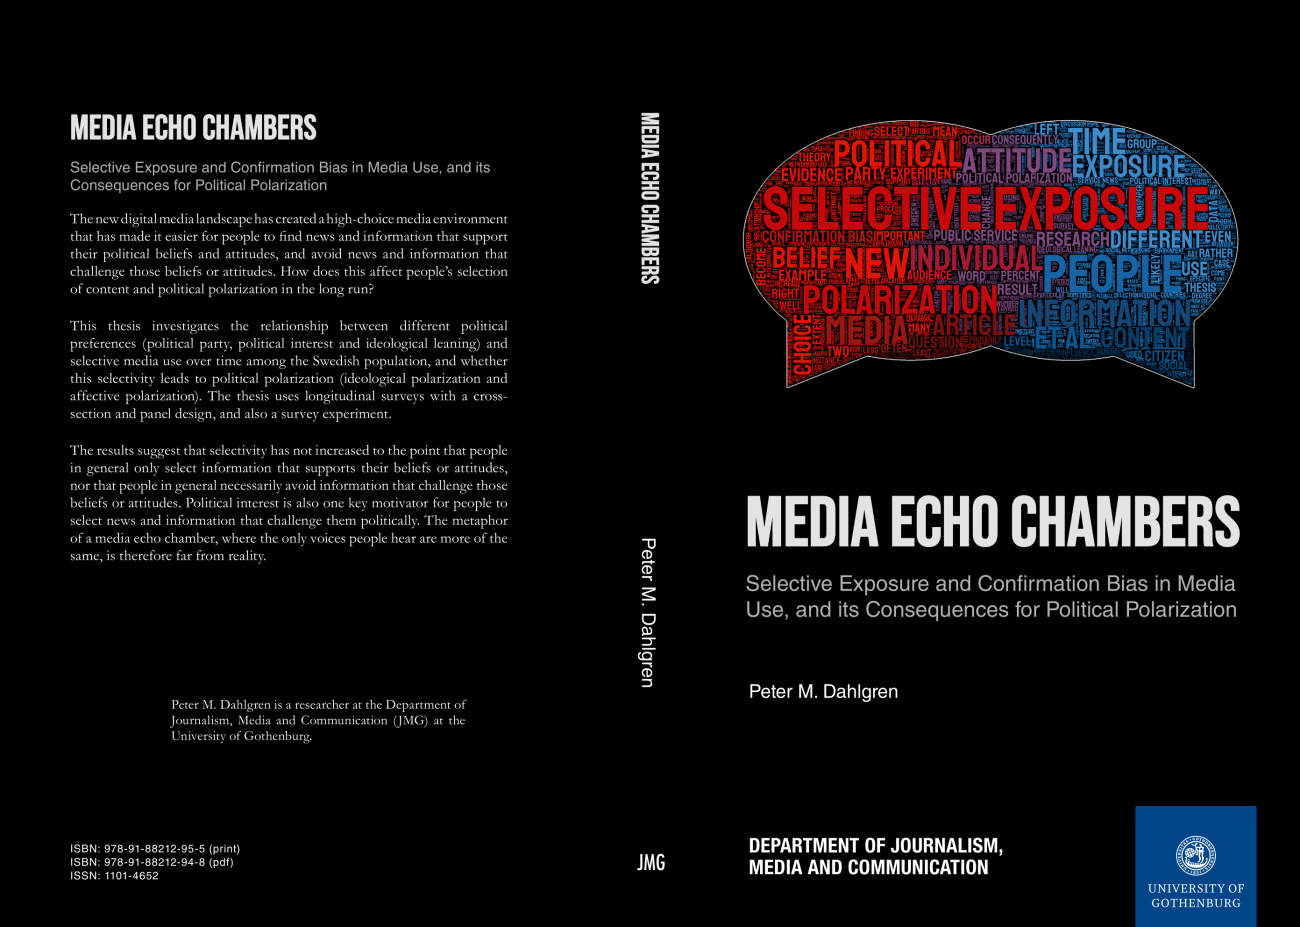 Media Echo Chambers: Selective Exposure and Confirmation Bias in Media Use, and its Consequence for Political Polarization